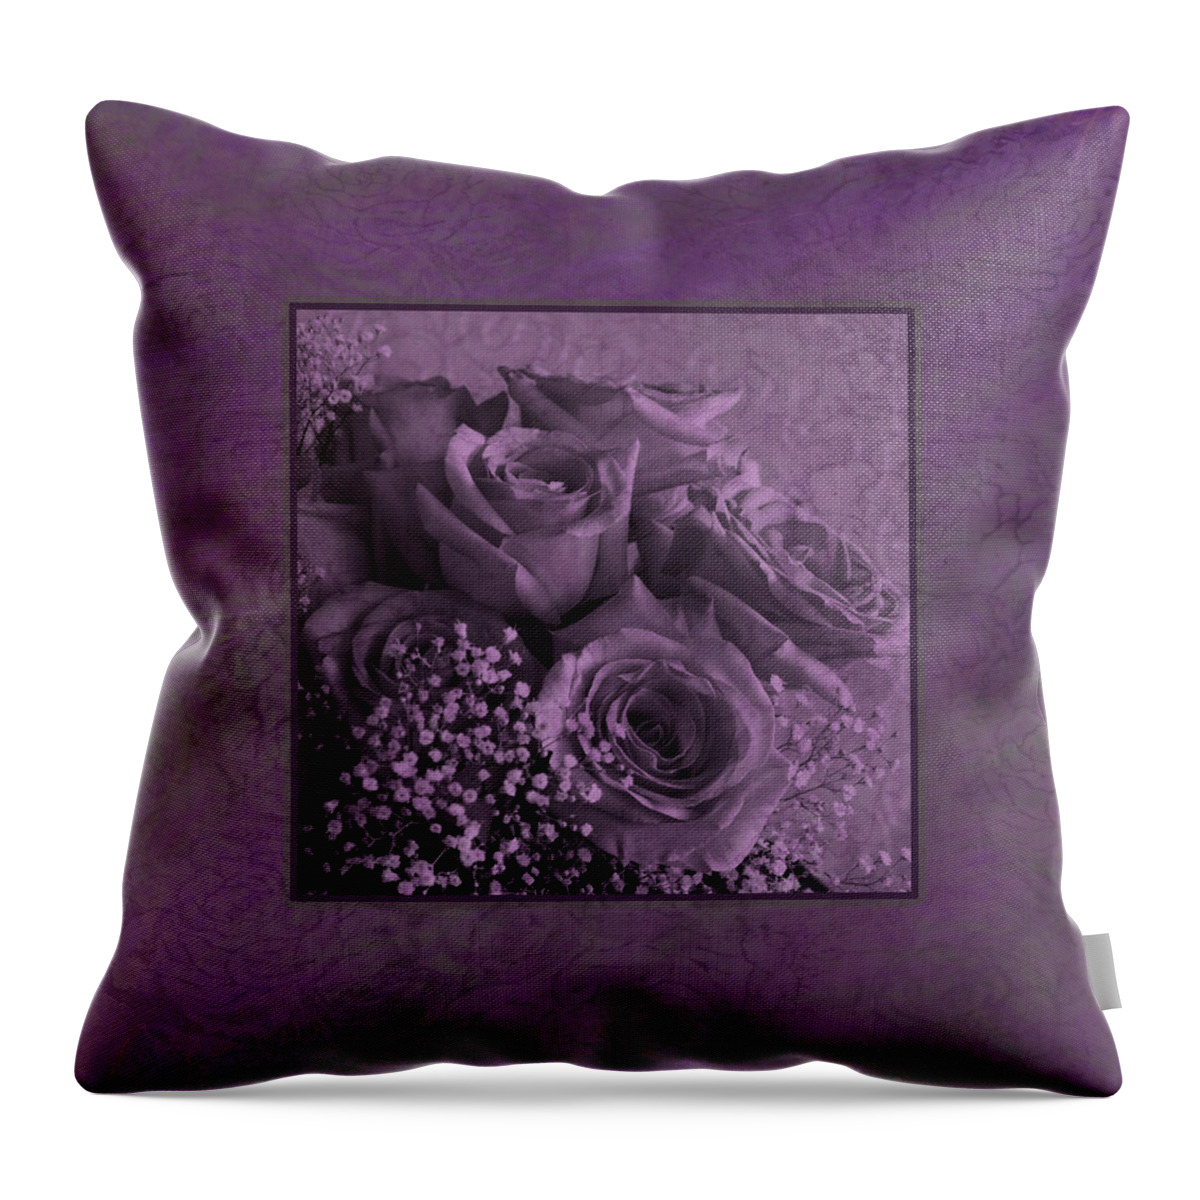 Lavender Roses Throw Pillow featuring the photograph Purple Roses Delight by Sandra Foster